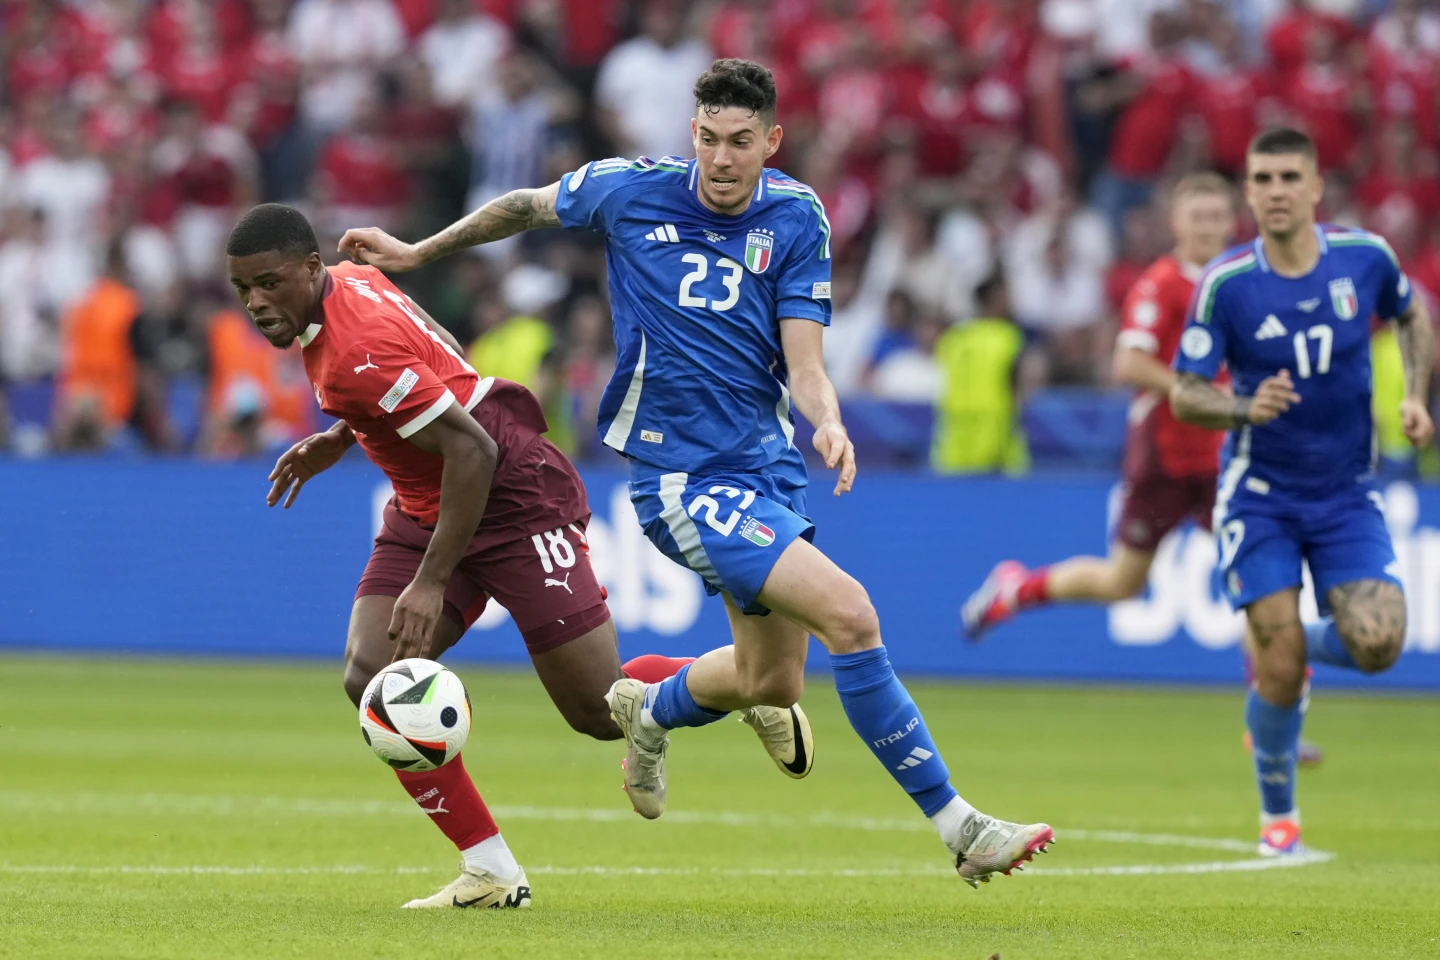 Defending Champion Italy Knocked Out of European Championship by Switzerland